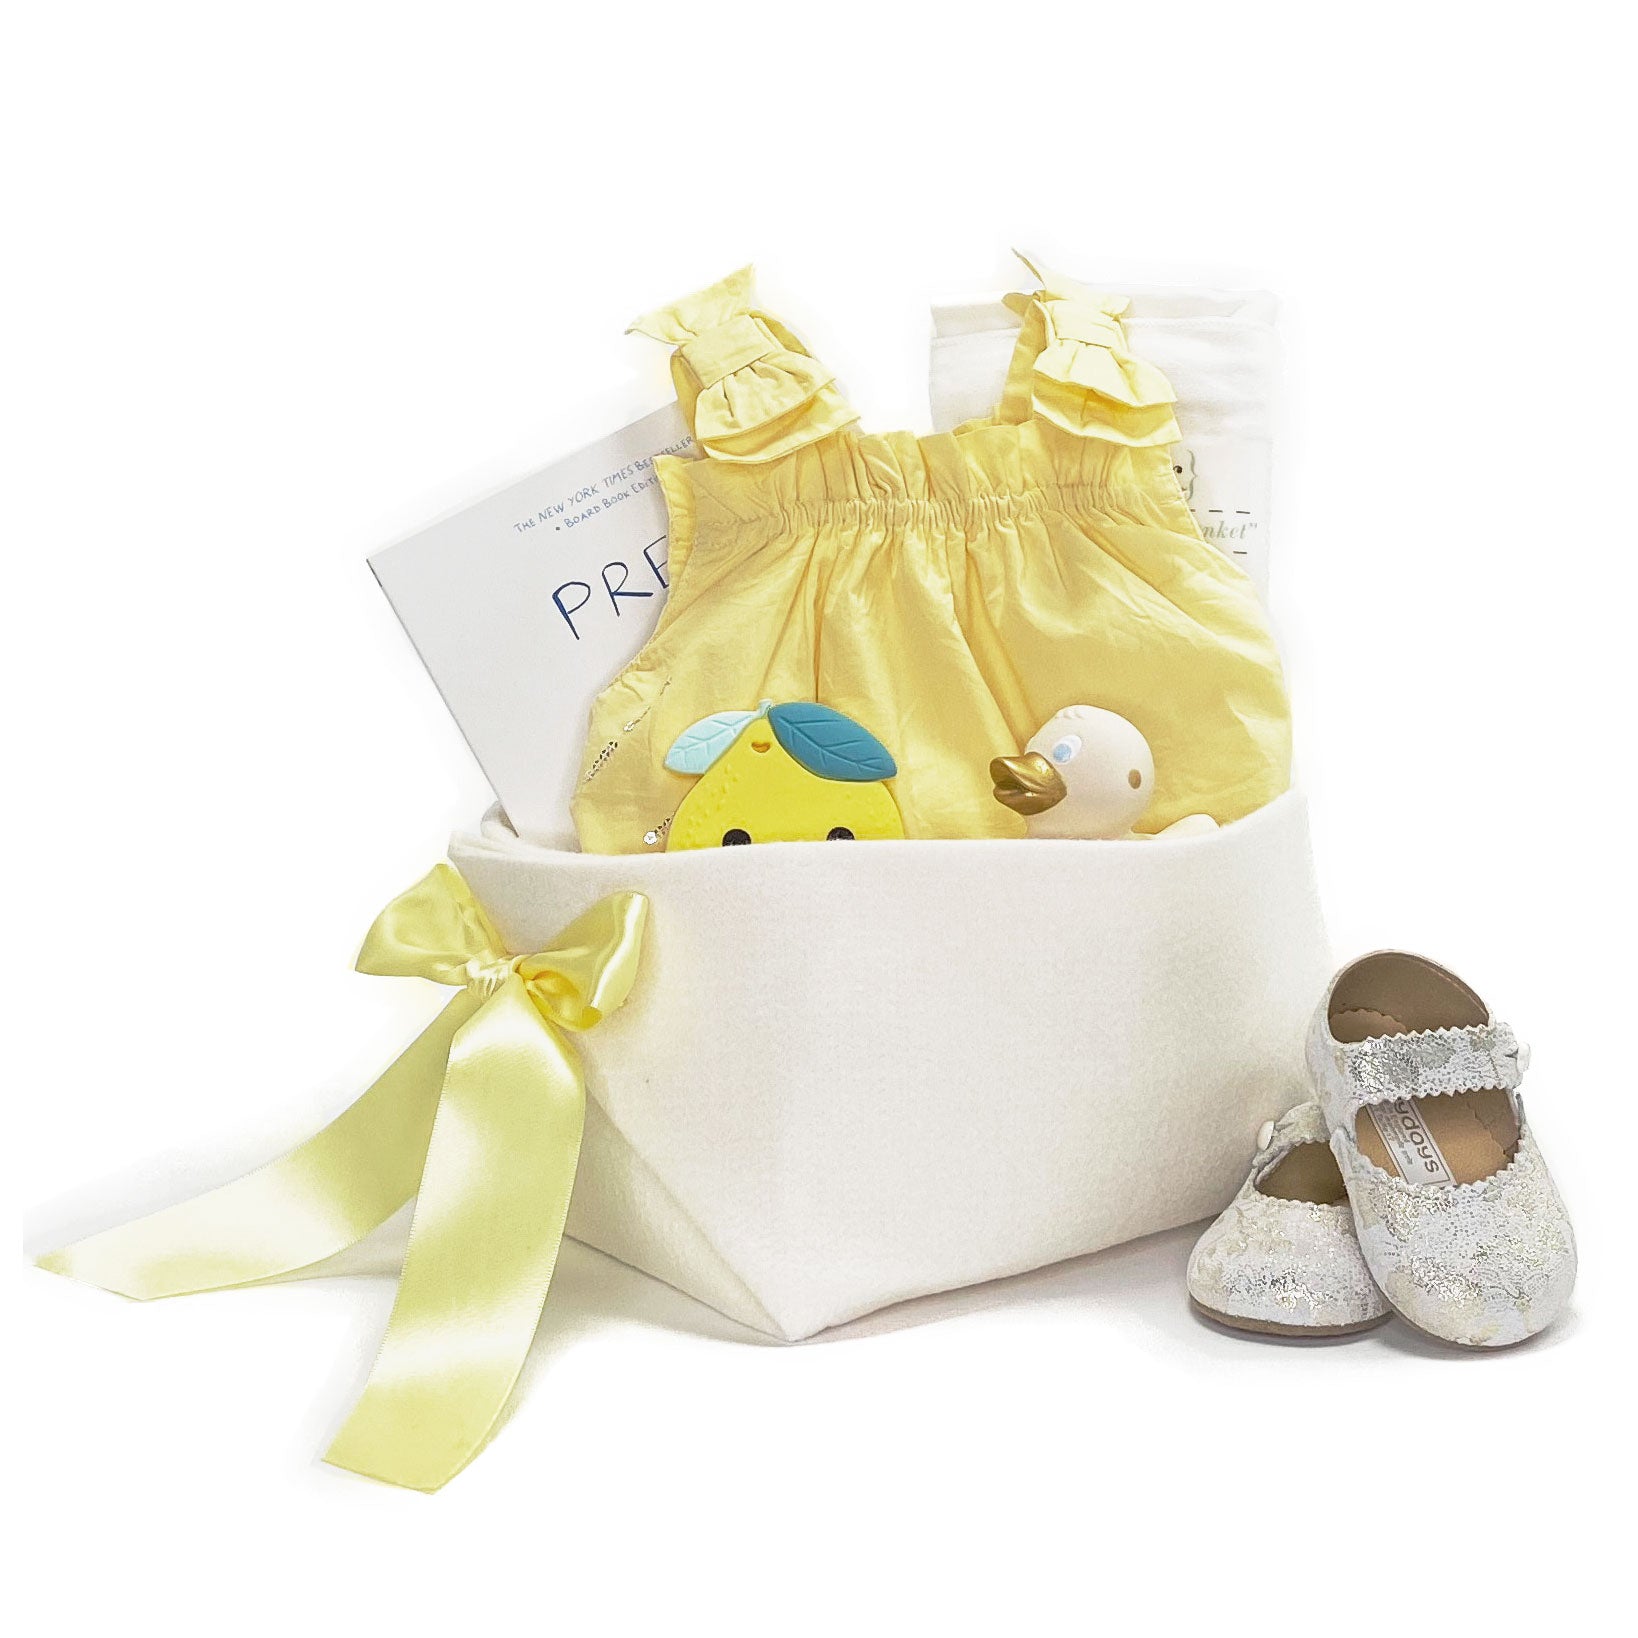 Luxury Baby Gift Baskets for newborn girl at Bonjour Baby Baskets